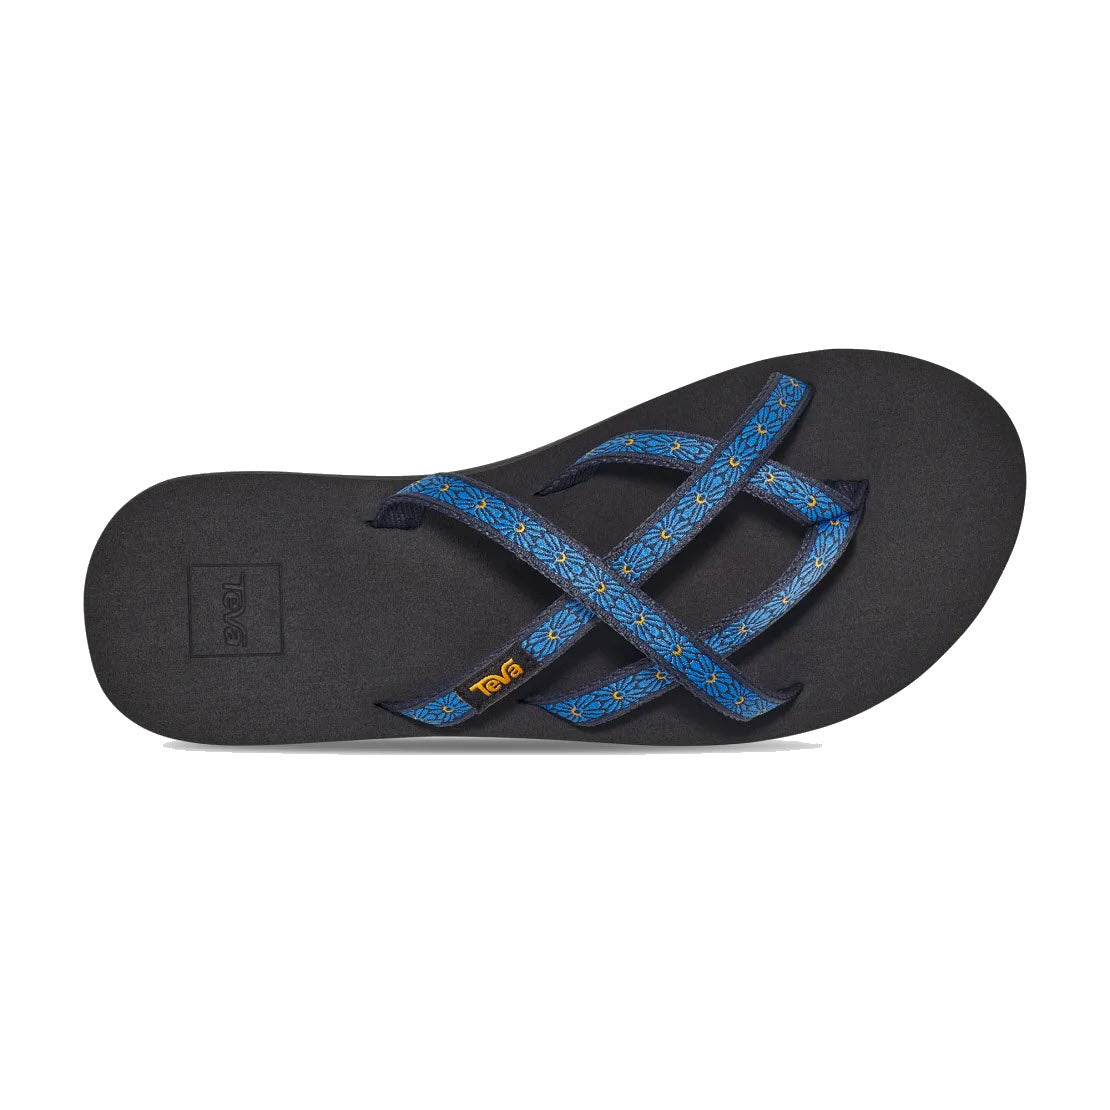 A single TEVA OLOWAHU FLOWER LOOM NAVY sandal with a black sole and blue patterned straps, viewed from above.